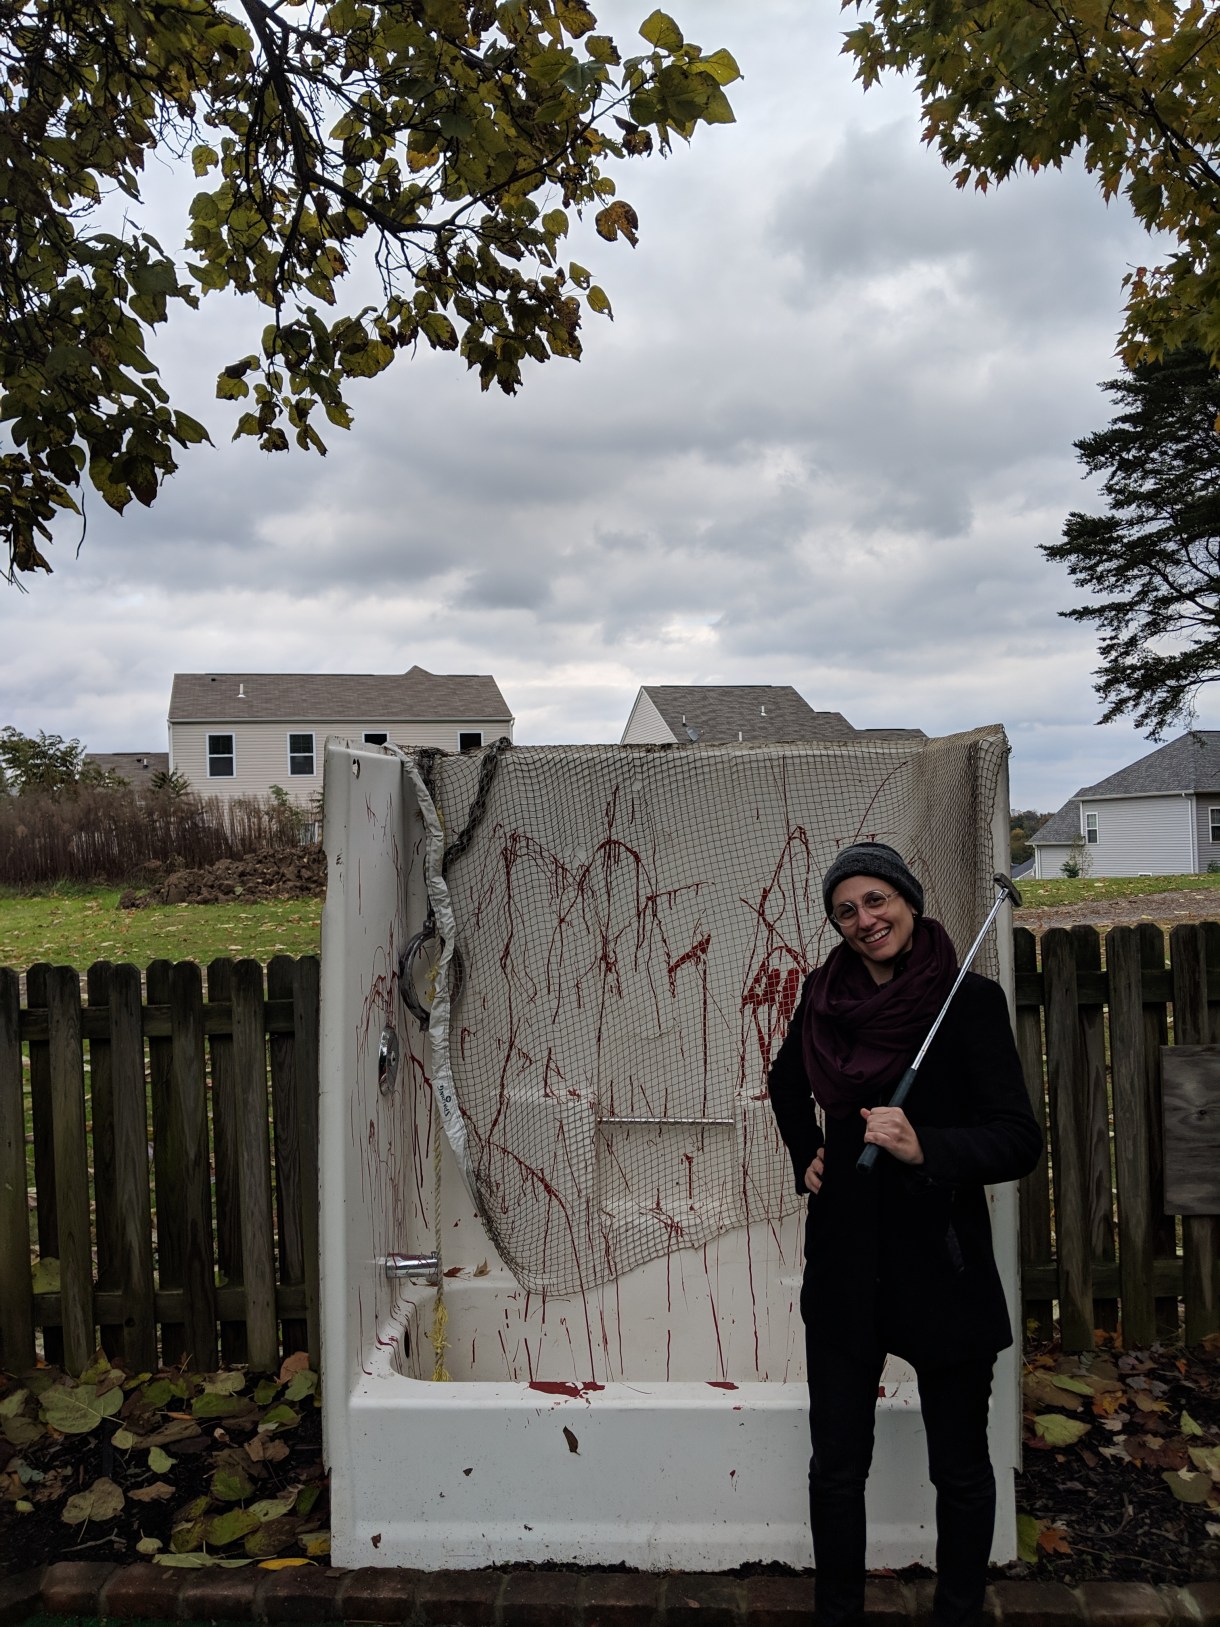 sadie, a white gender-nonconforming butch woman, grins happily in front of a shower placed eerily in front of a suburban fence on a cloudy fall day. she is wearing a beanie, scarf and black driving coat and has a putter over her shoulder. the shower and bath is covered in netting and fake blood